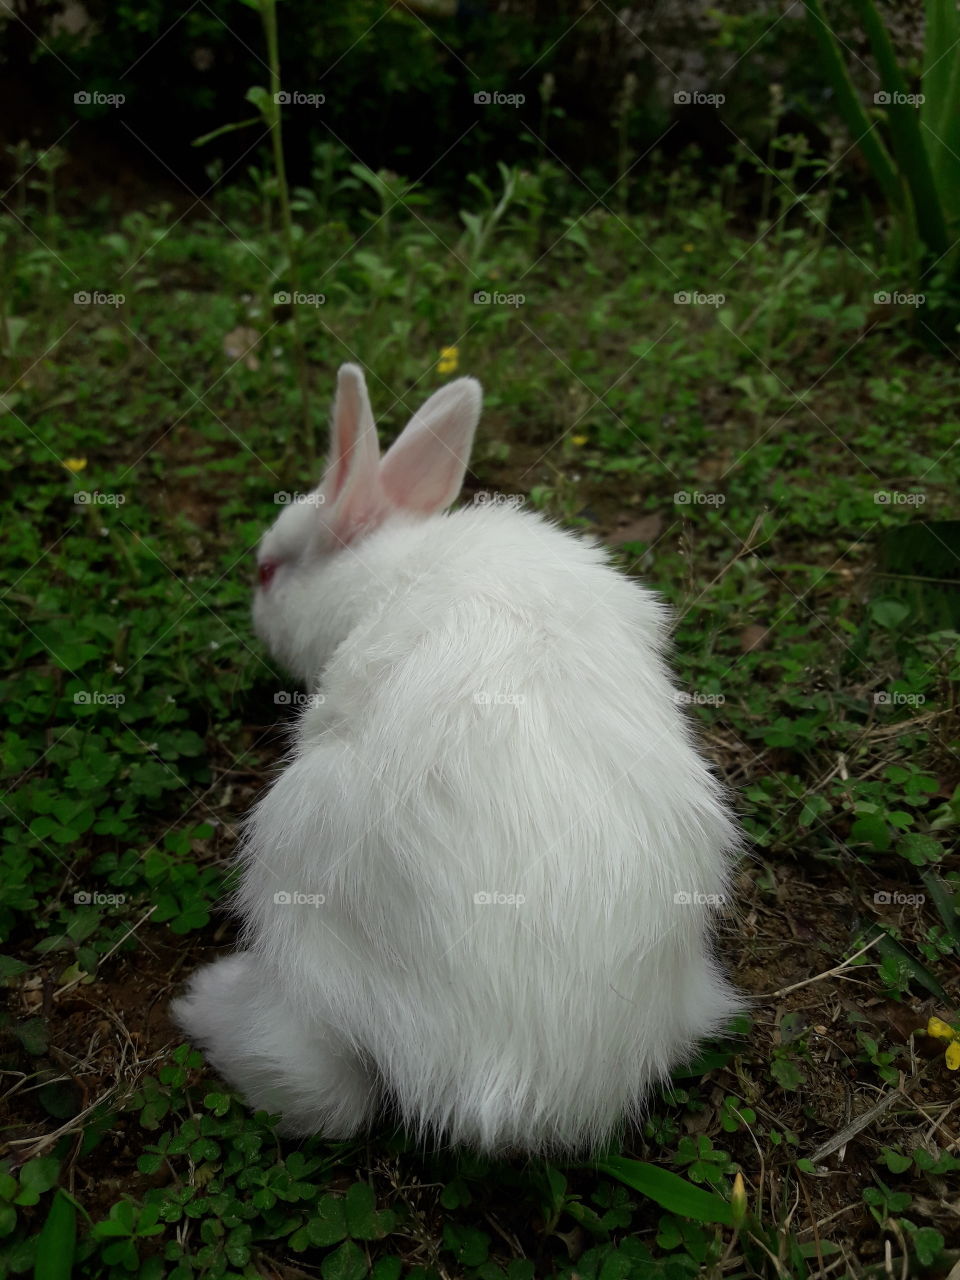 Bunny in search of. food